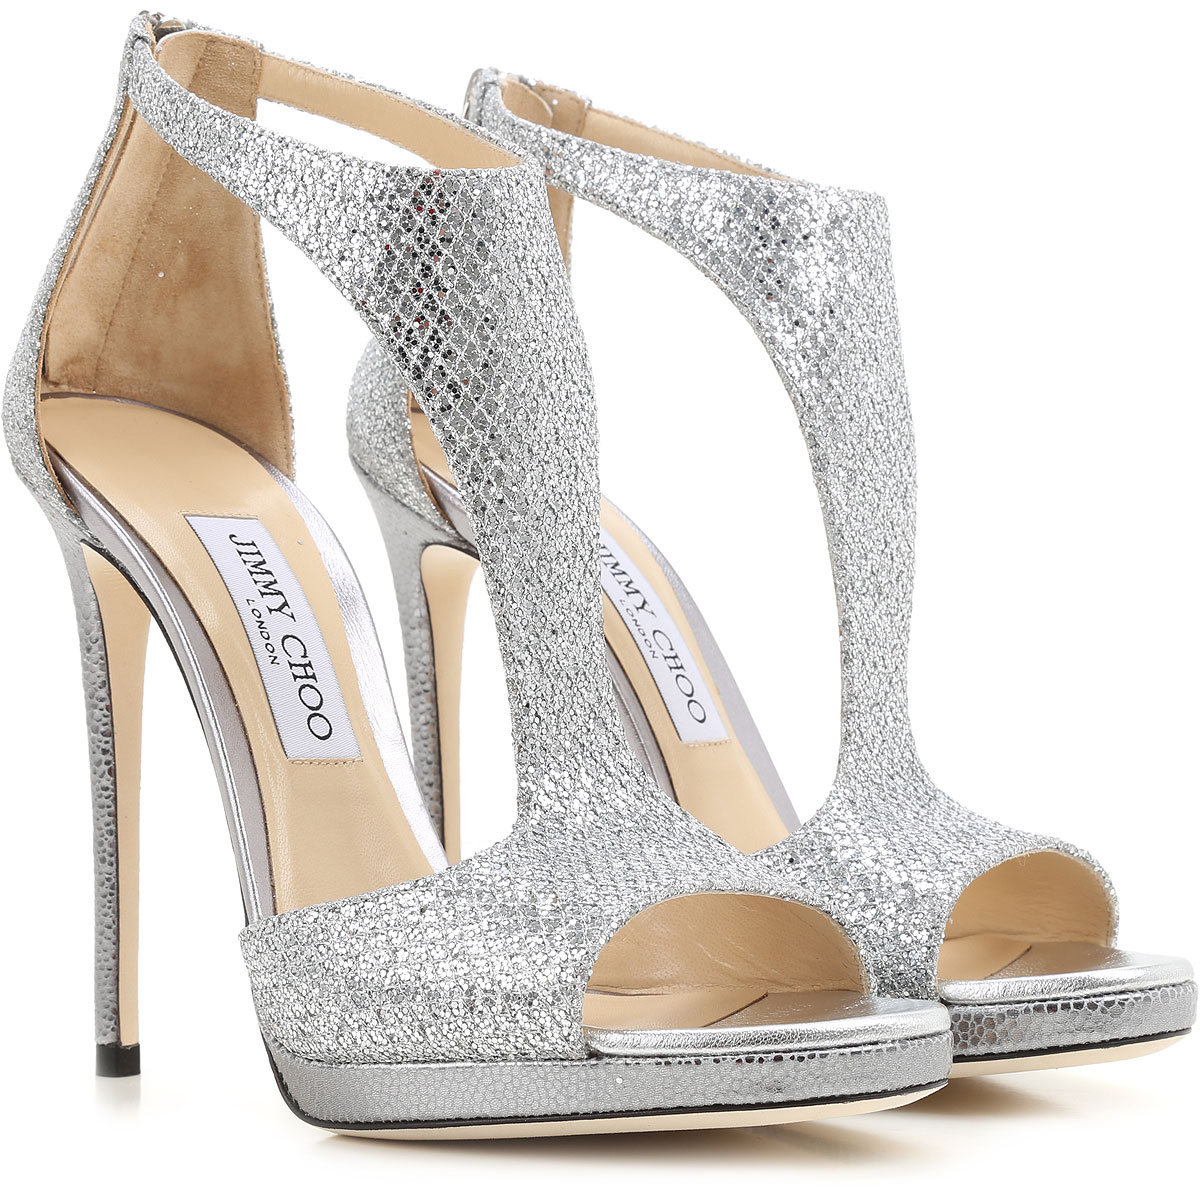 List 91+ Background Images Images Of Jimmy Choo Shoes Updated